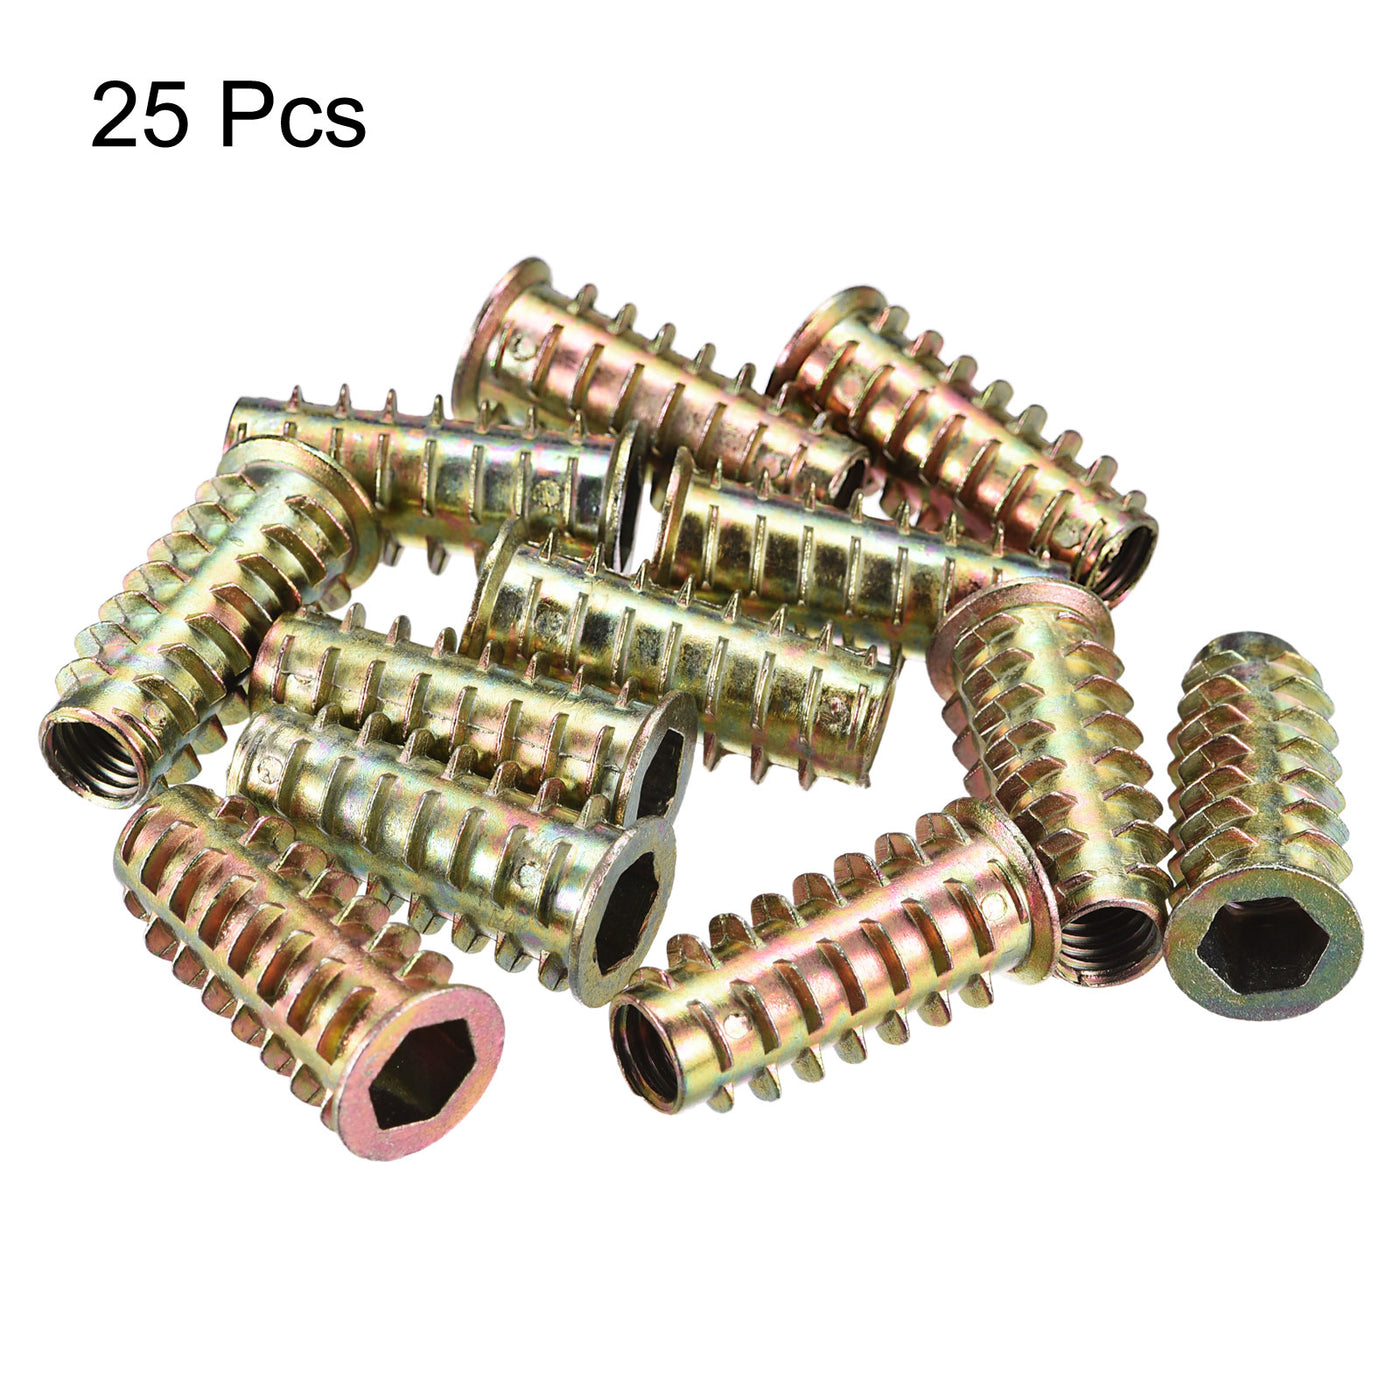 uxcell Uxcell Furniture Screw-in Nut, Zinc Alloy Threaded Insert Nuts for Wood Furniture